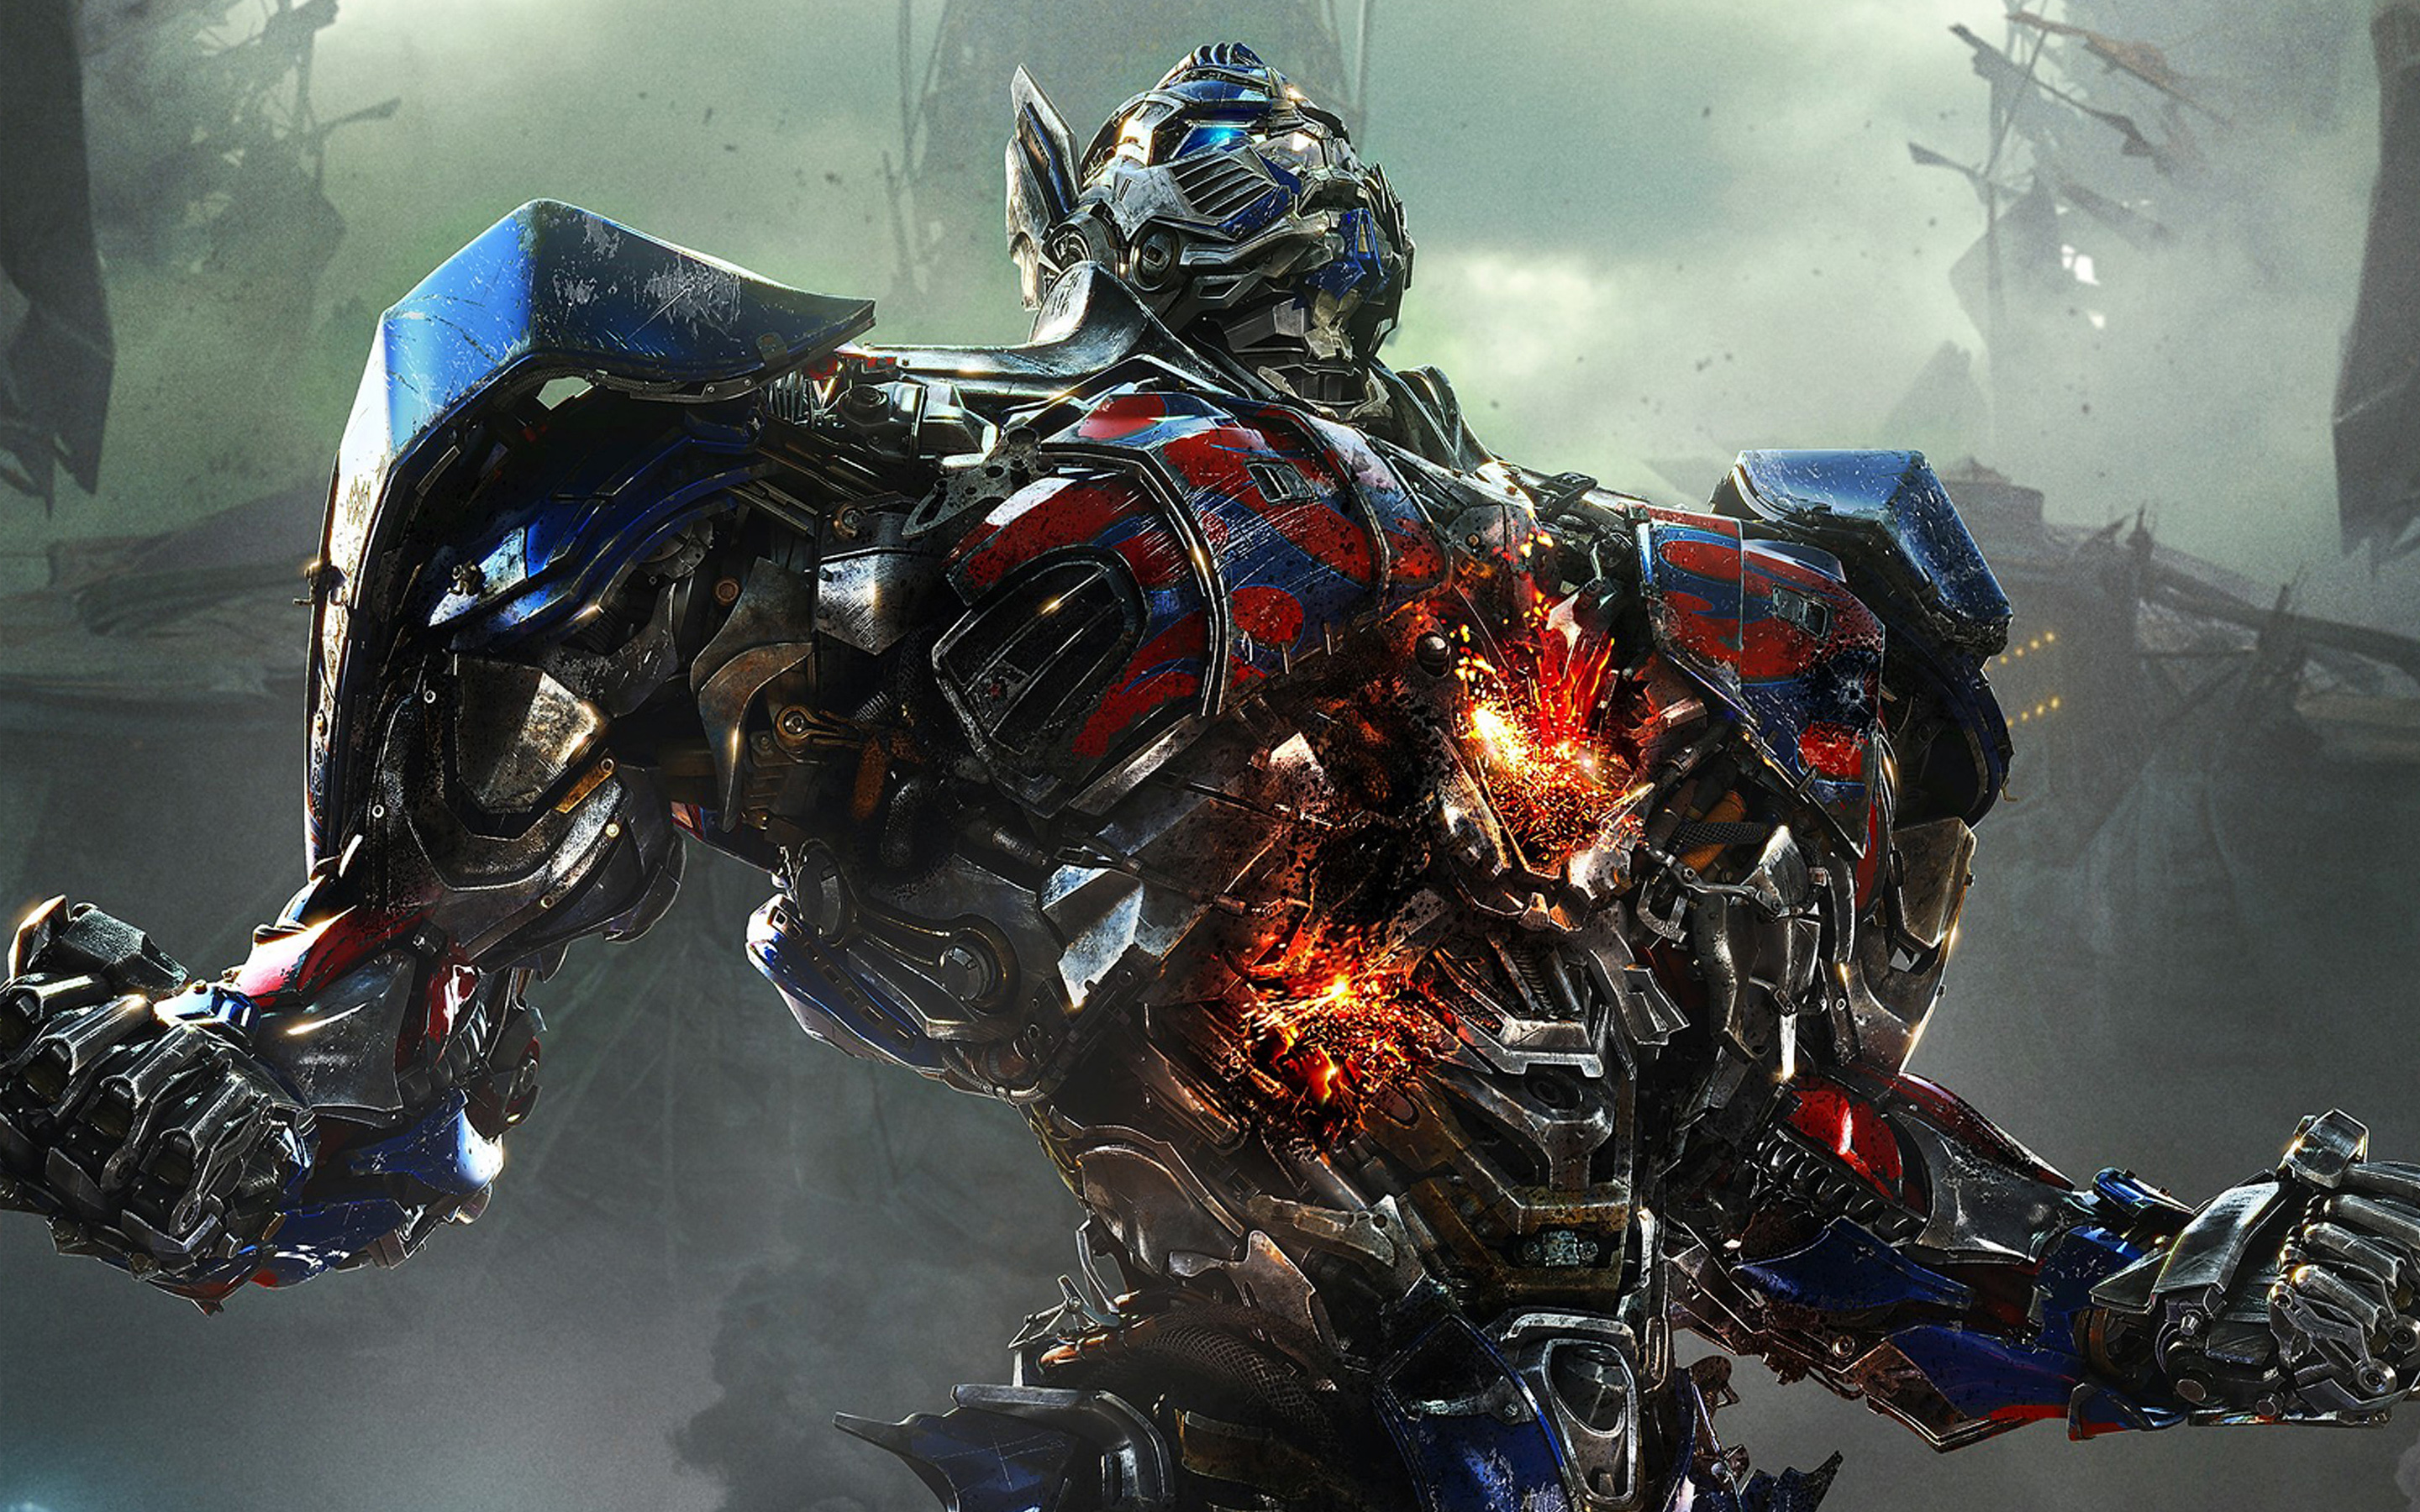 Movie Transformers: Age of Extinction HD Wallpaper | Background Image